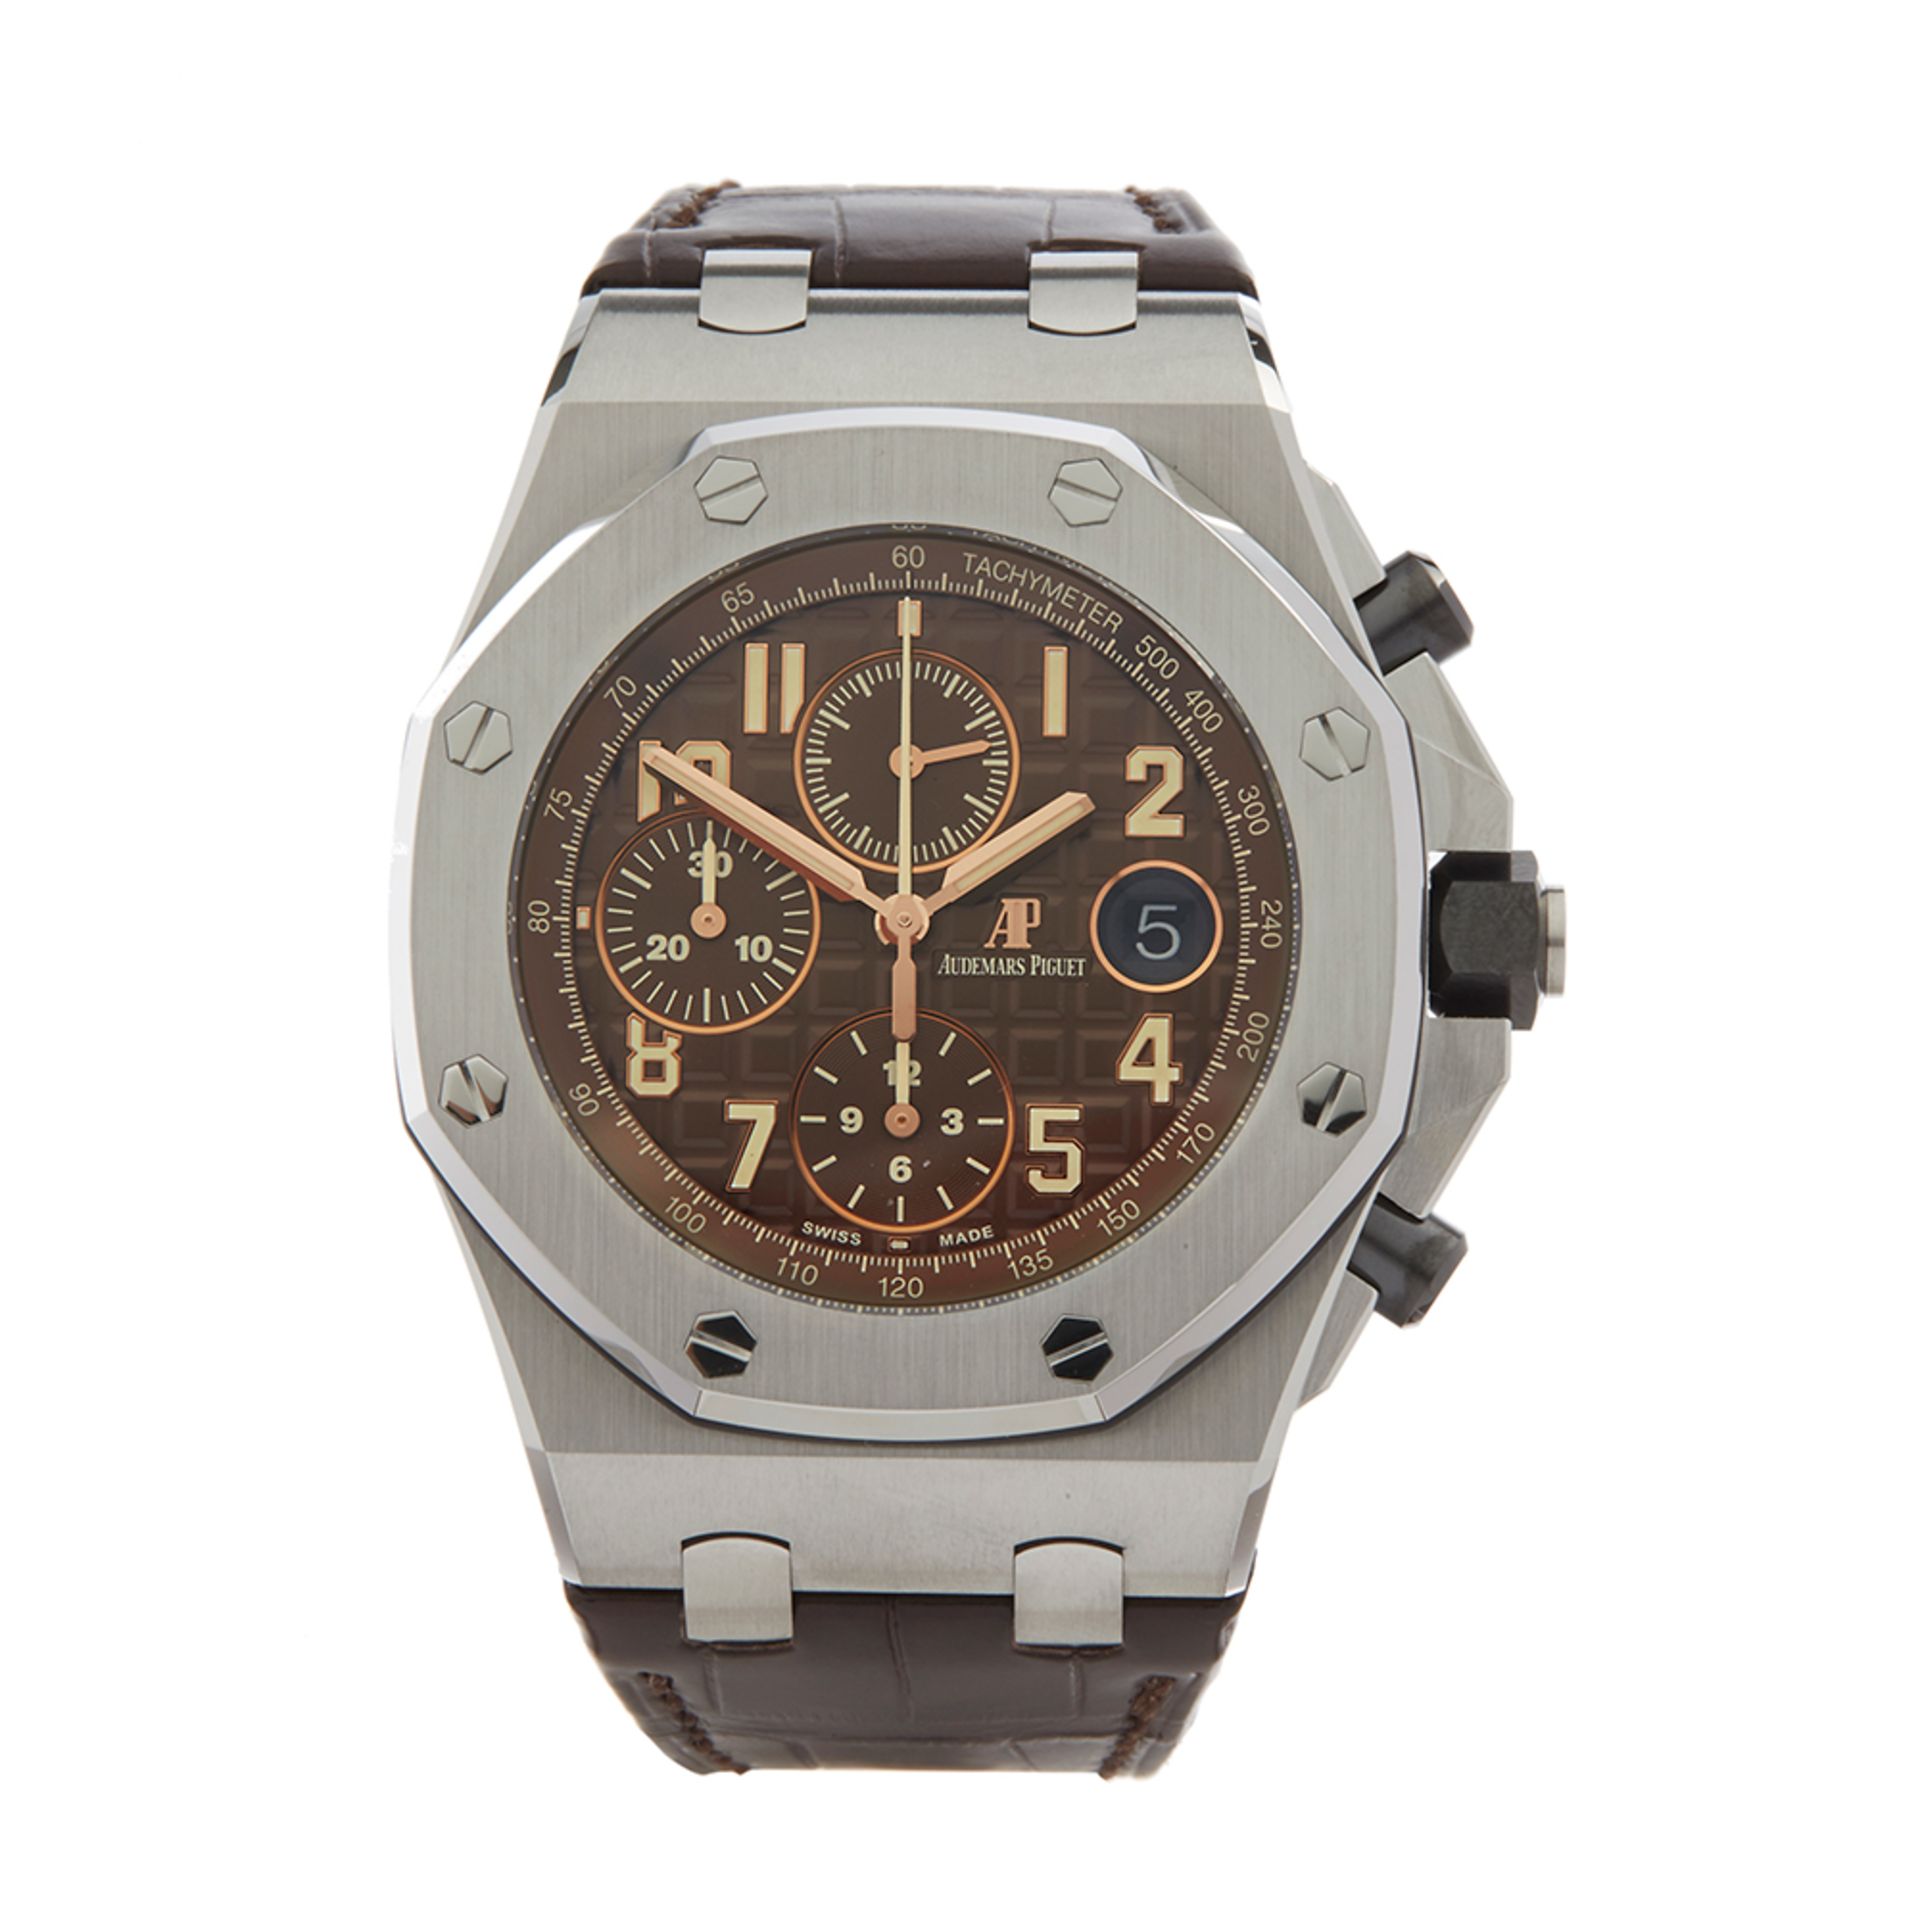 Audemars Piguet Royal Oak Offshore Stainless Steel - 26470ST.OO.A820CR.01 - Image 2 of 7